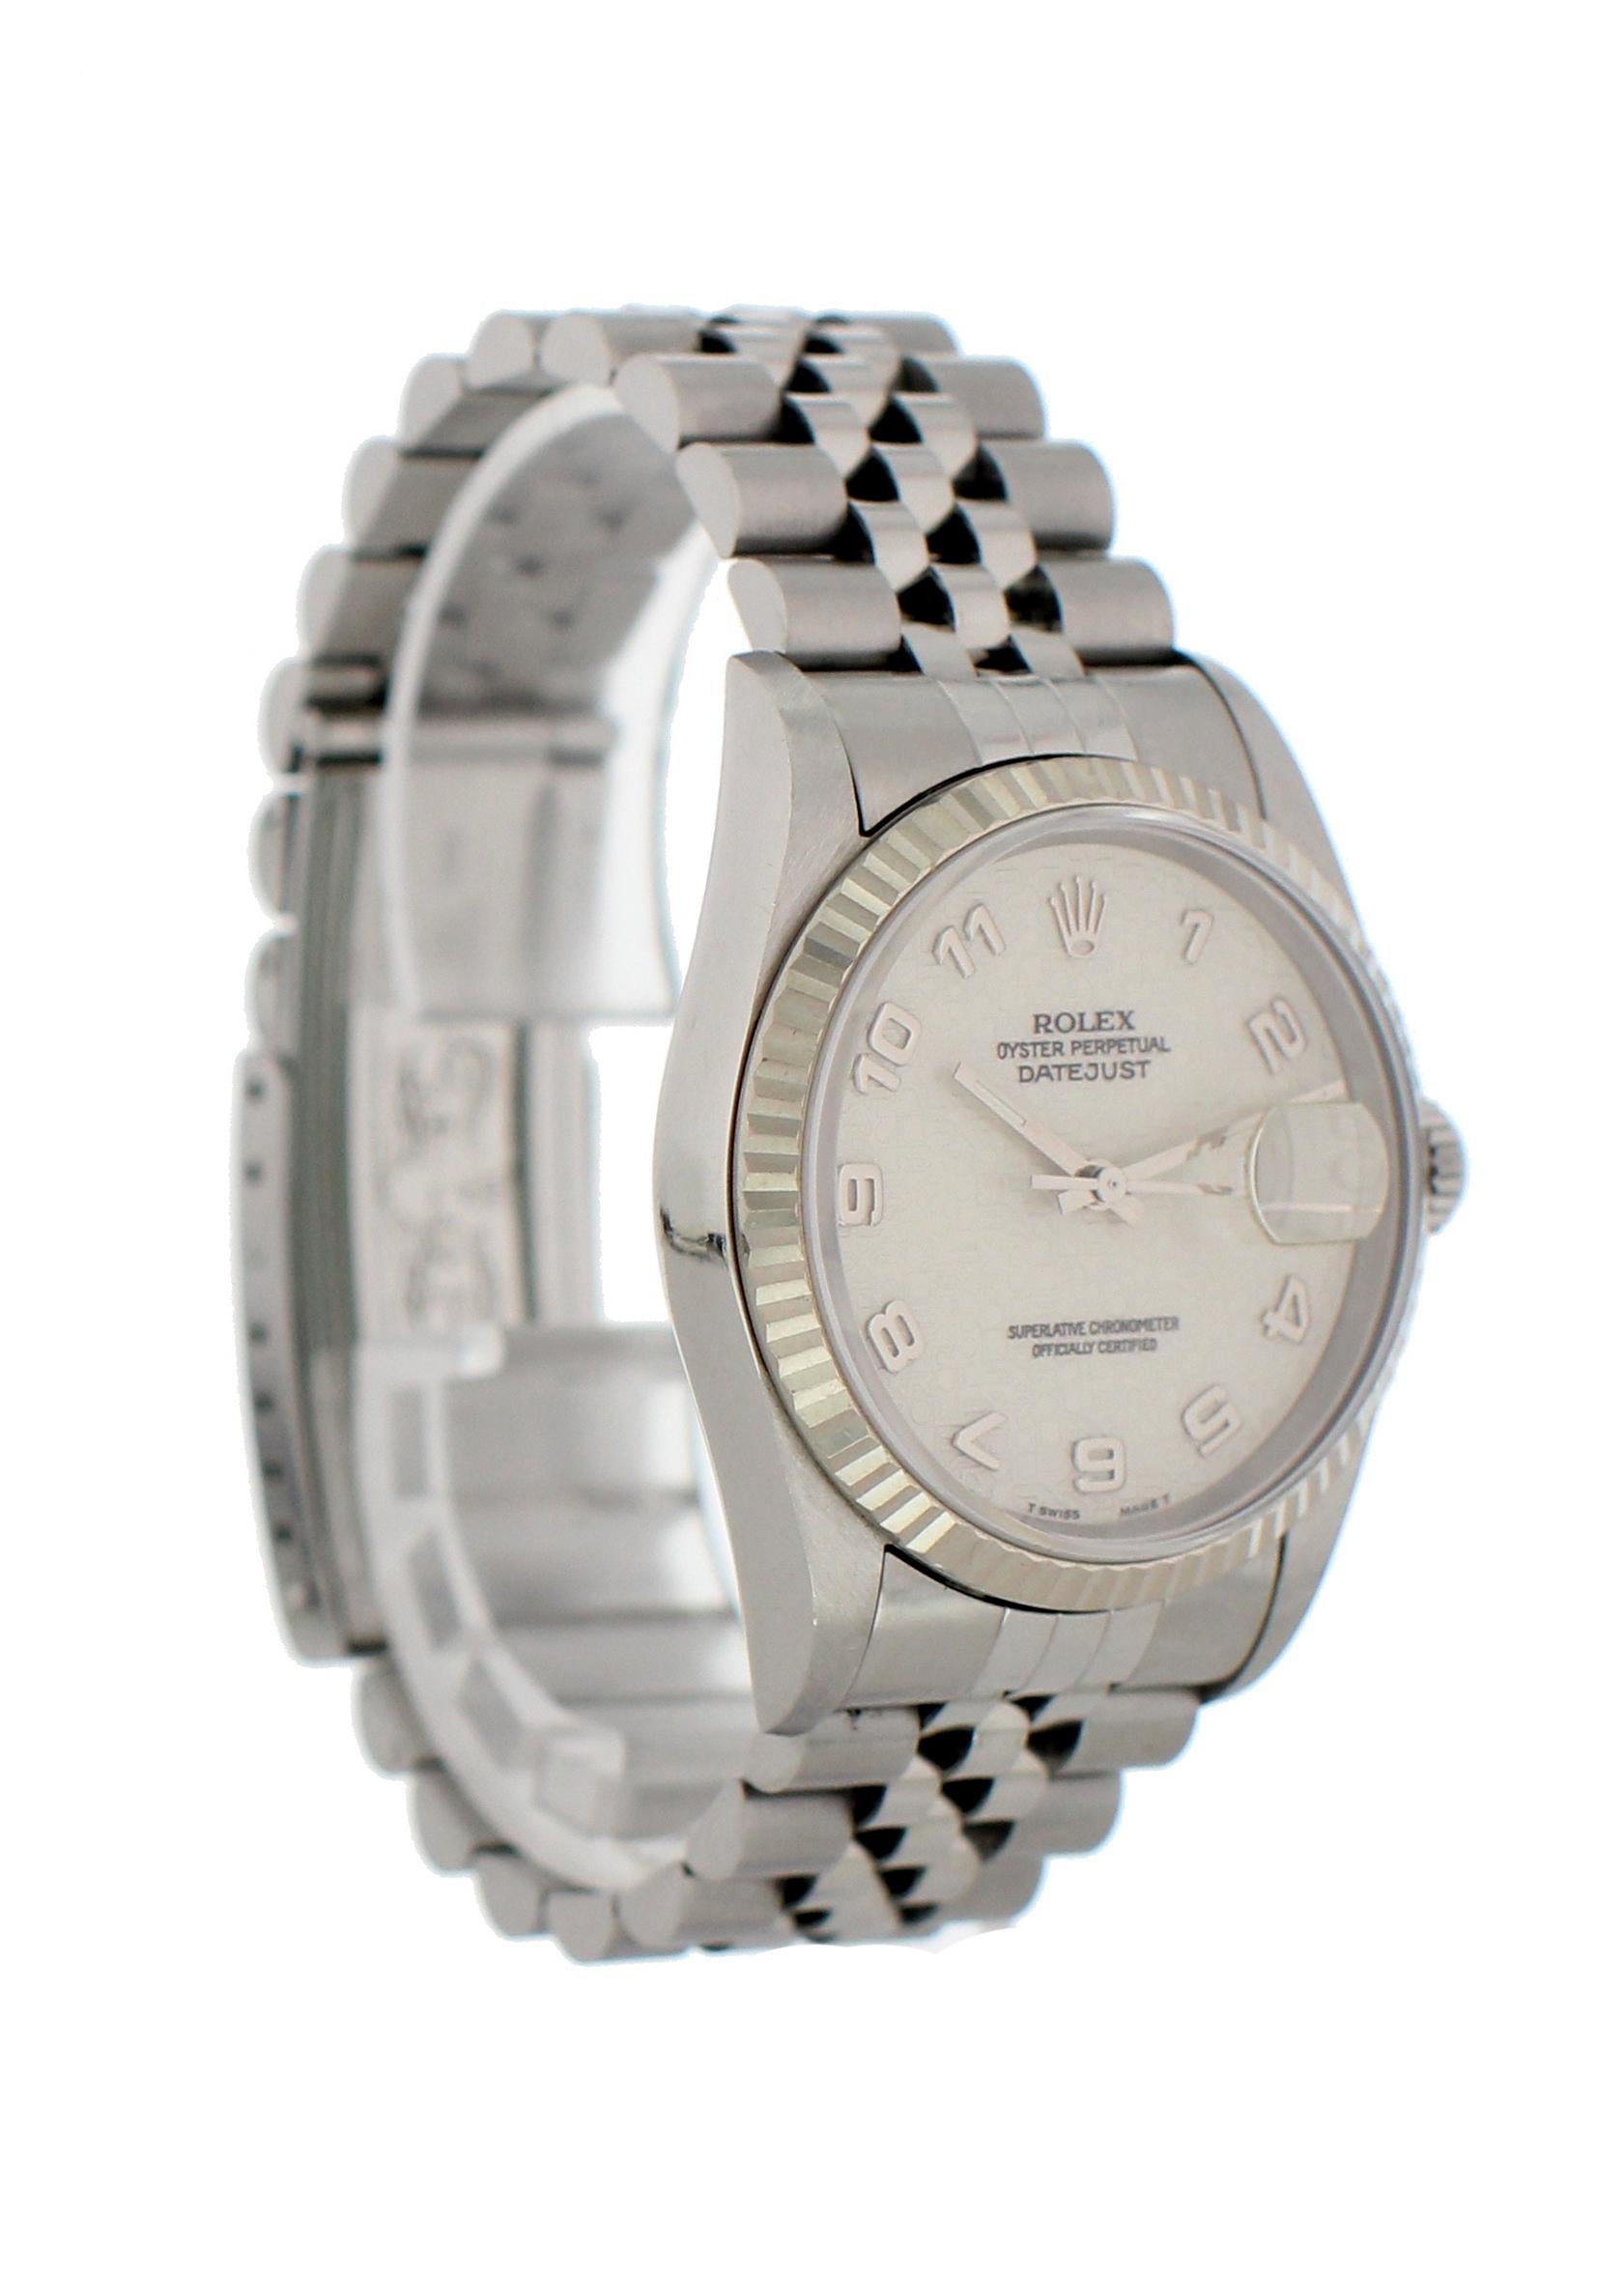 Rolex Oyster Perpetual Datejust 16234 Rolex Dial Men's Watch In Excellent Condition For Sale In New York, NY